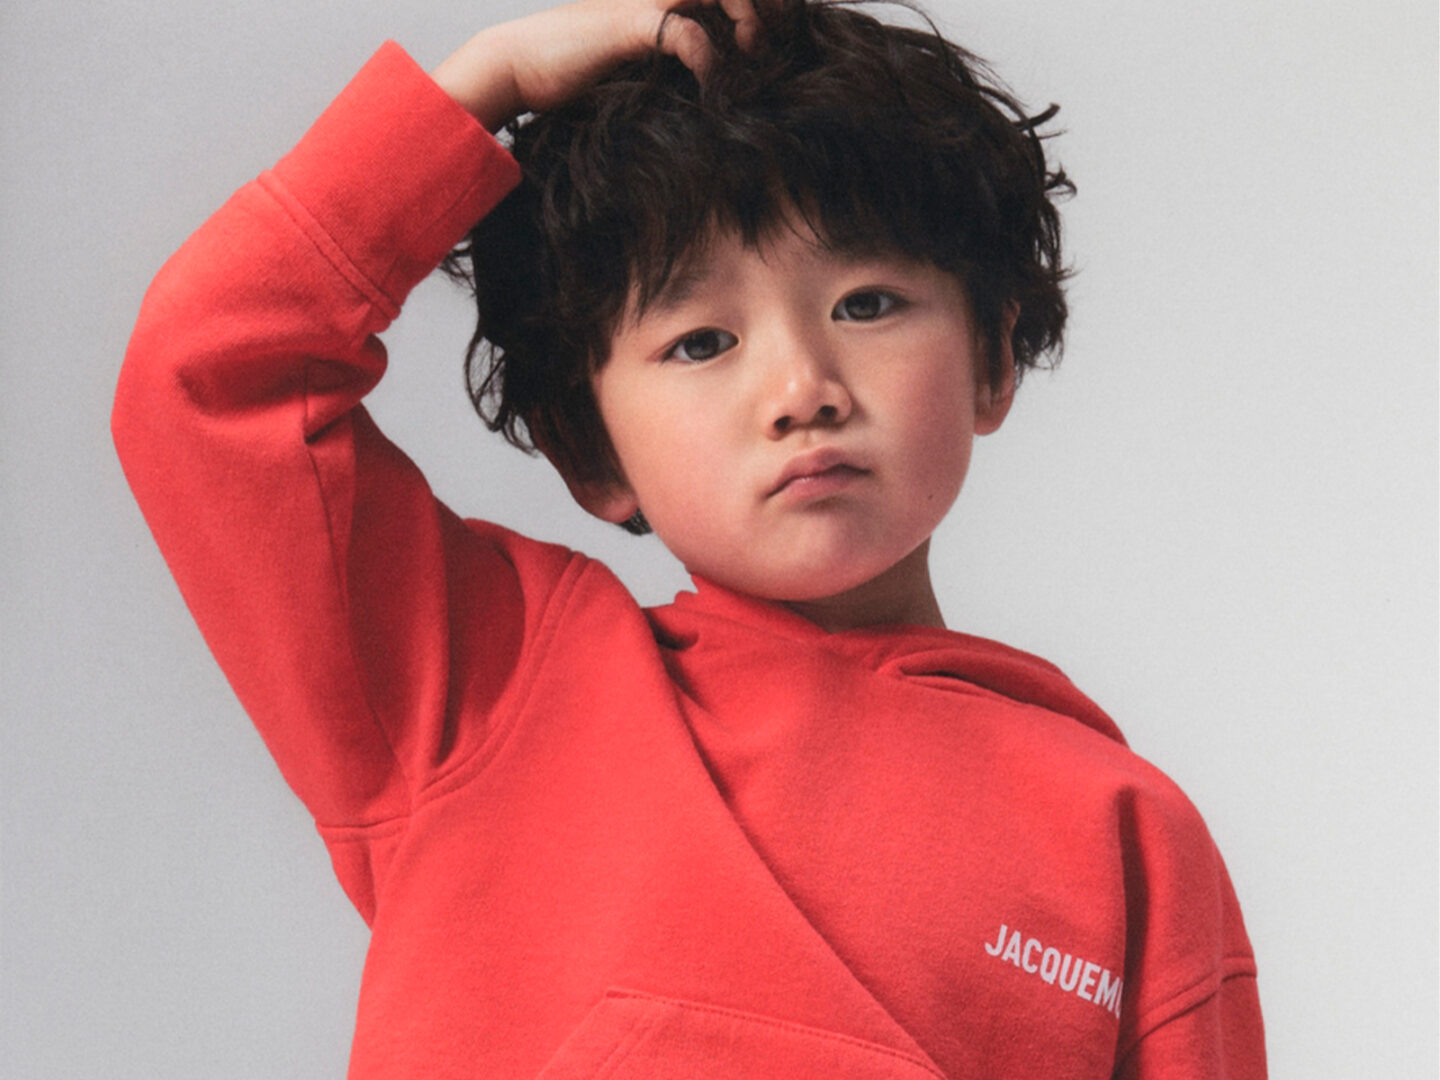 ‘MINI ME’ is the new collection for children by Jacquemus